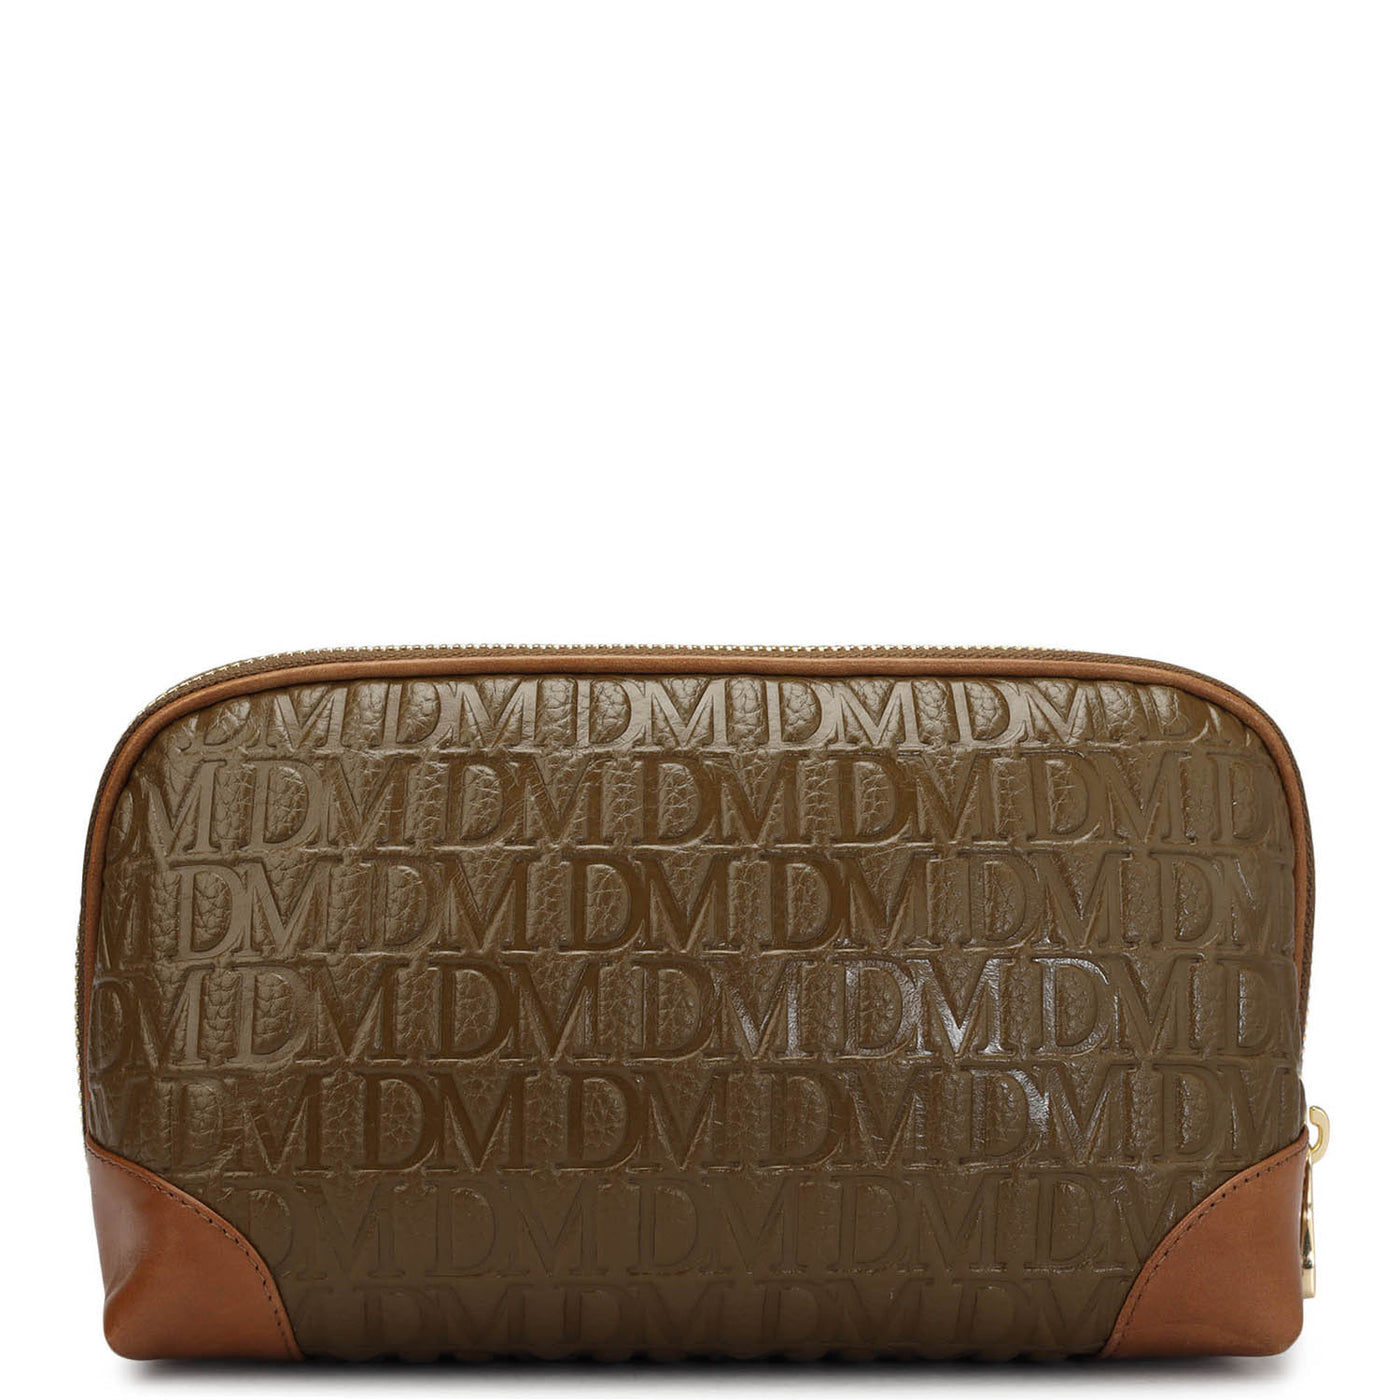 Monogram Leather Multi Pouch - Moss